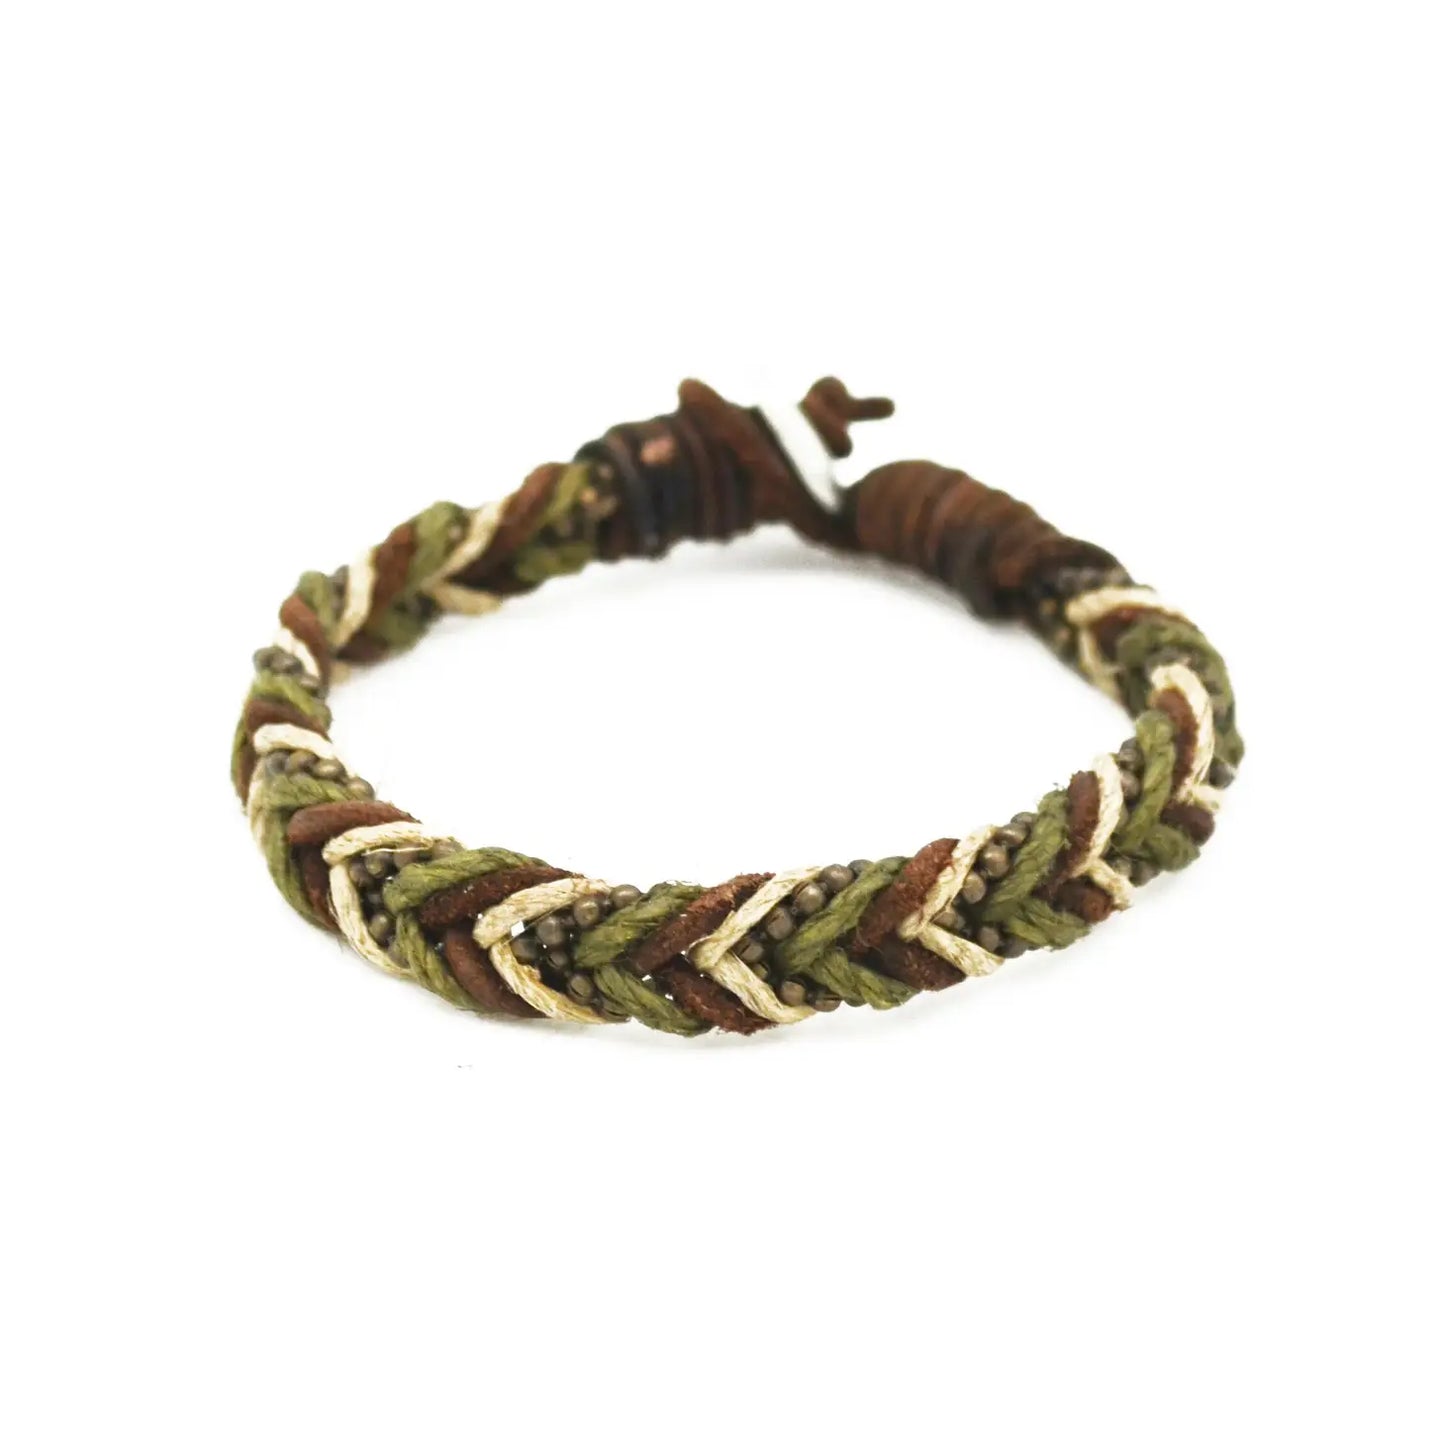 Green, Tan, and Brown Braided Bracelet